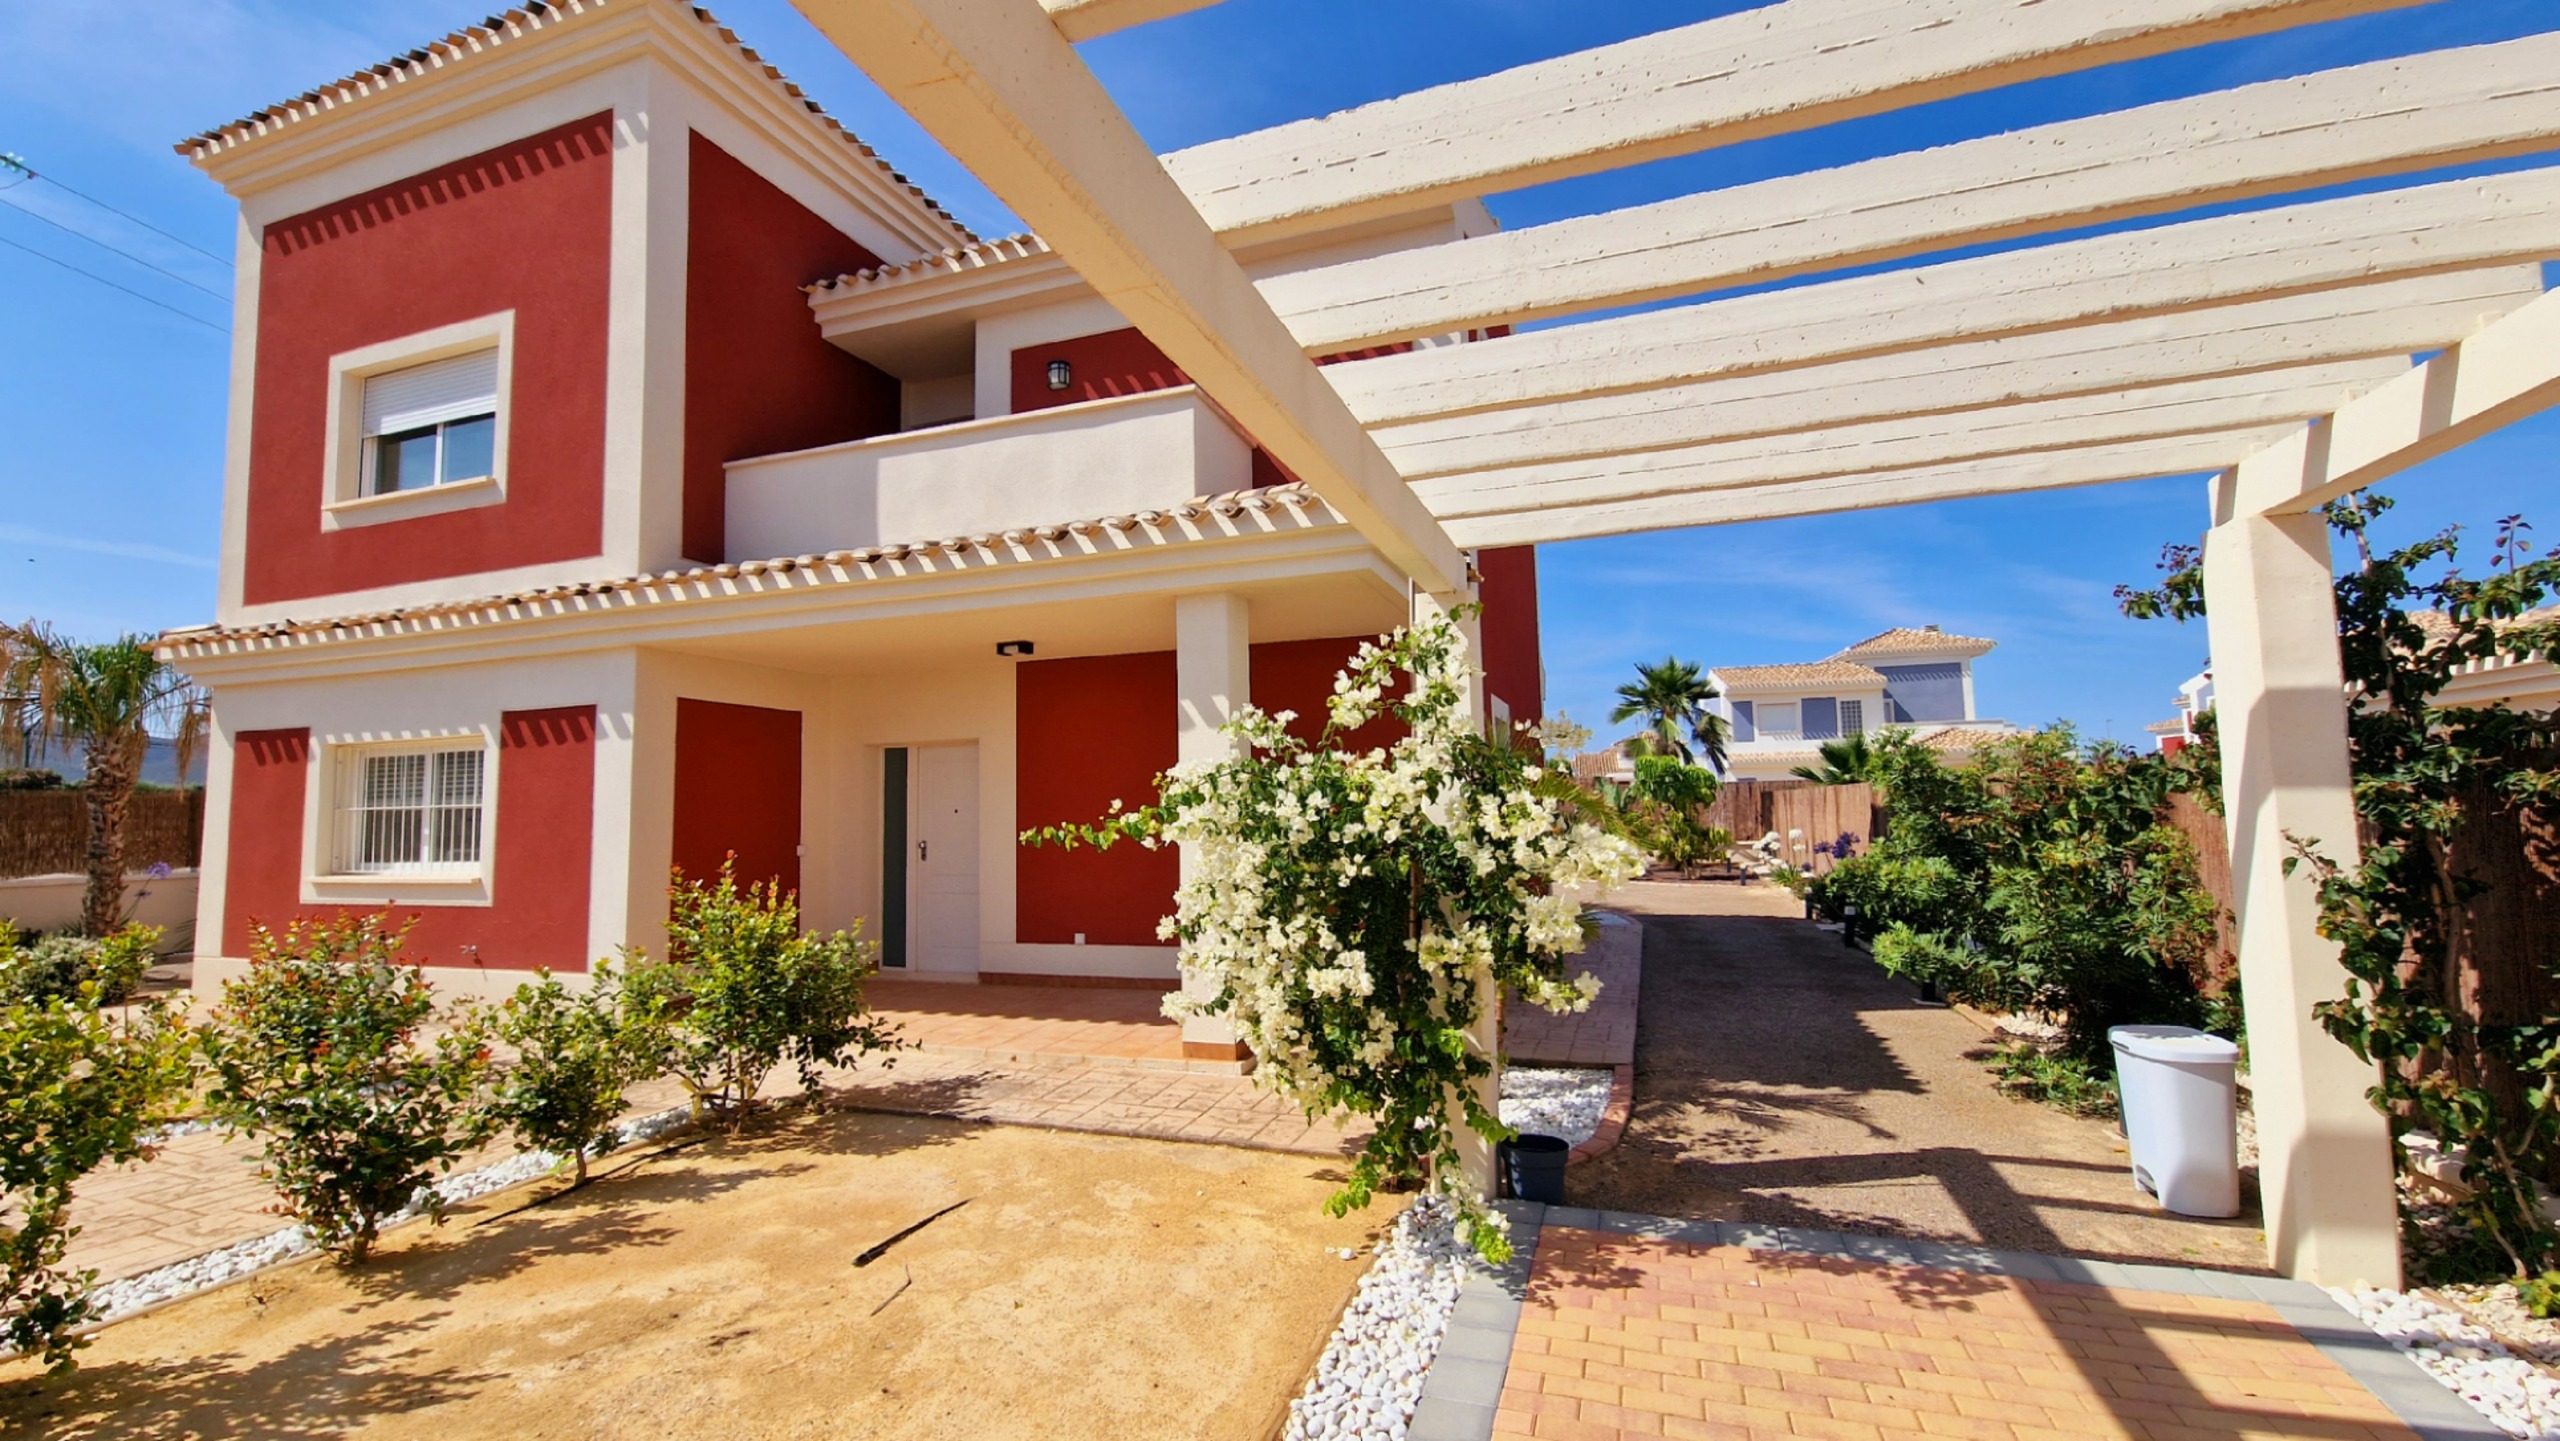 Spacious detached villas distributed on two floors in Lorca, Murcia